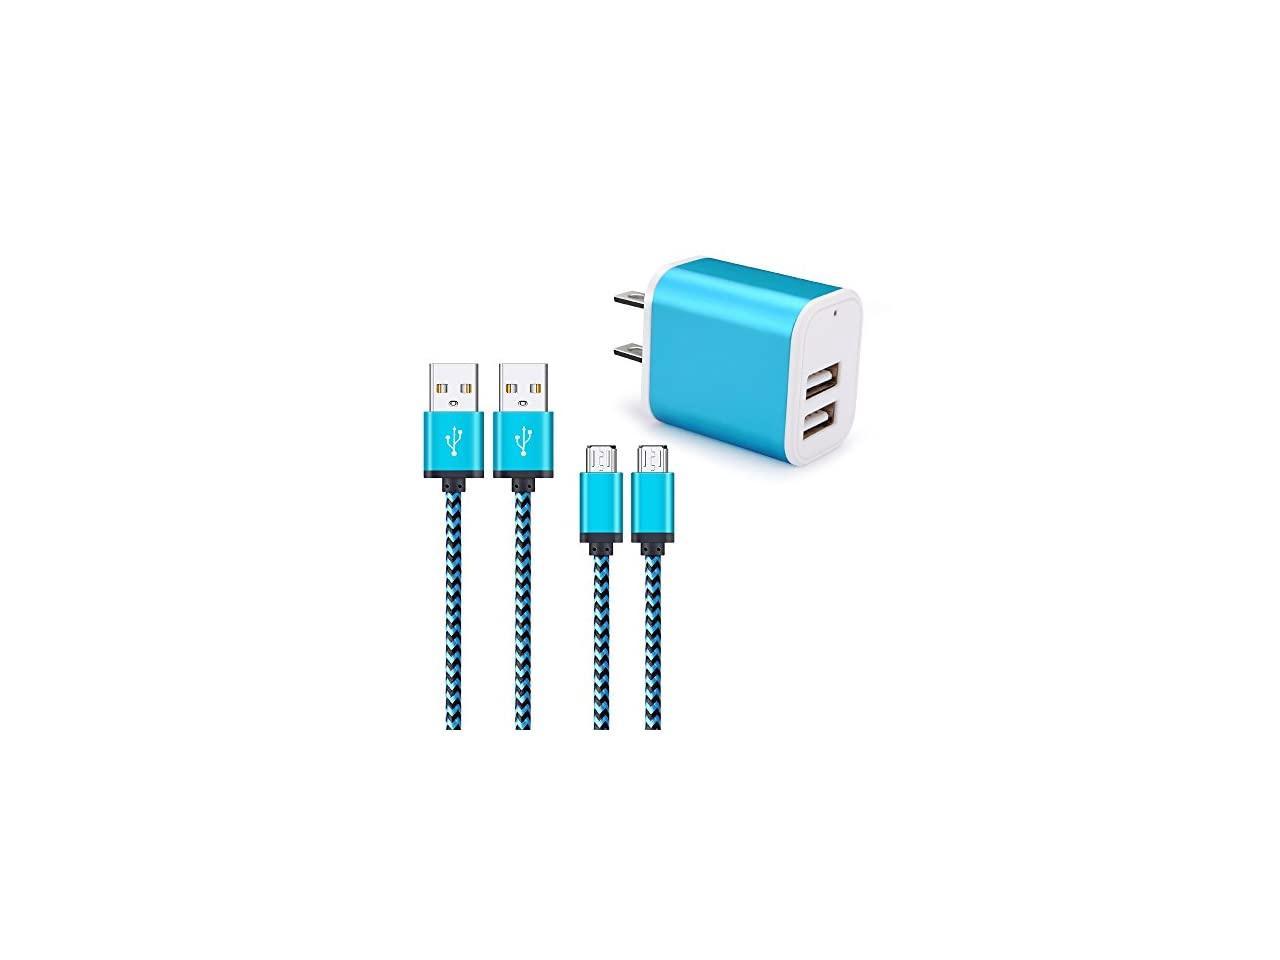 2.1A Dual Port Wall Charger Block Brick LG Stylo 2/3 G3 G4 K20 K30 2.4A Dual Port USB Car Charger 2Pack Micro USB Cable Charging Cord Phone Charger Compatible Samsung Galaxy S6 S7 Edge J3 J7 A6 